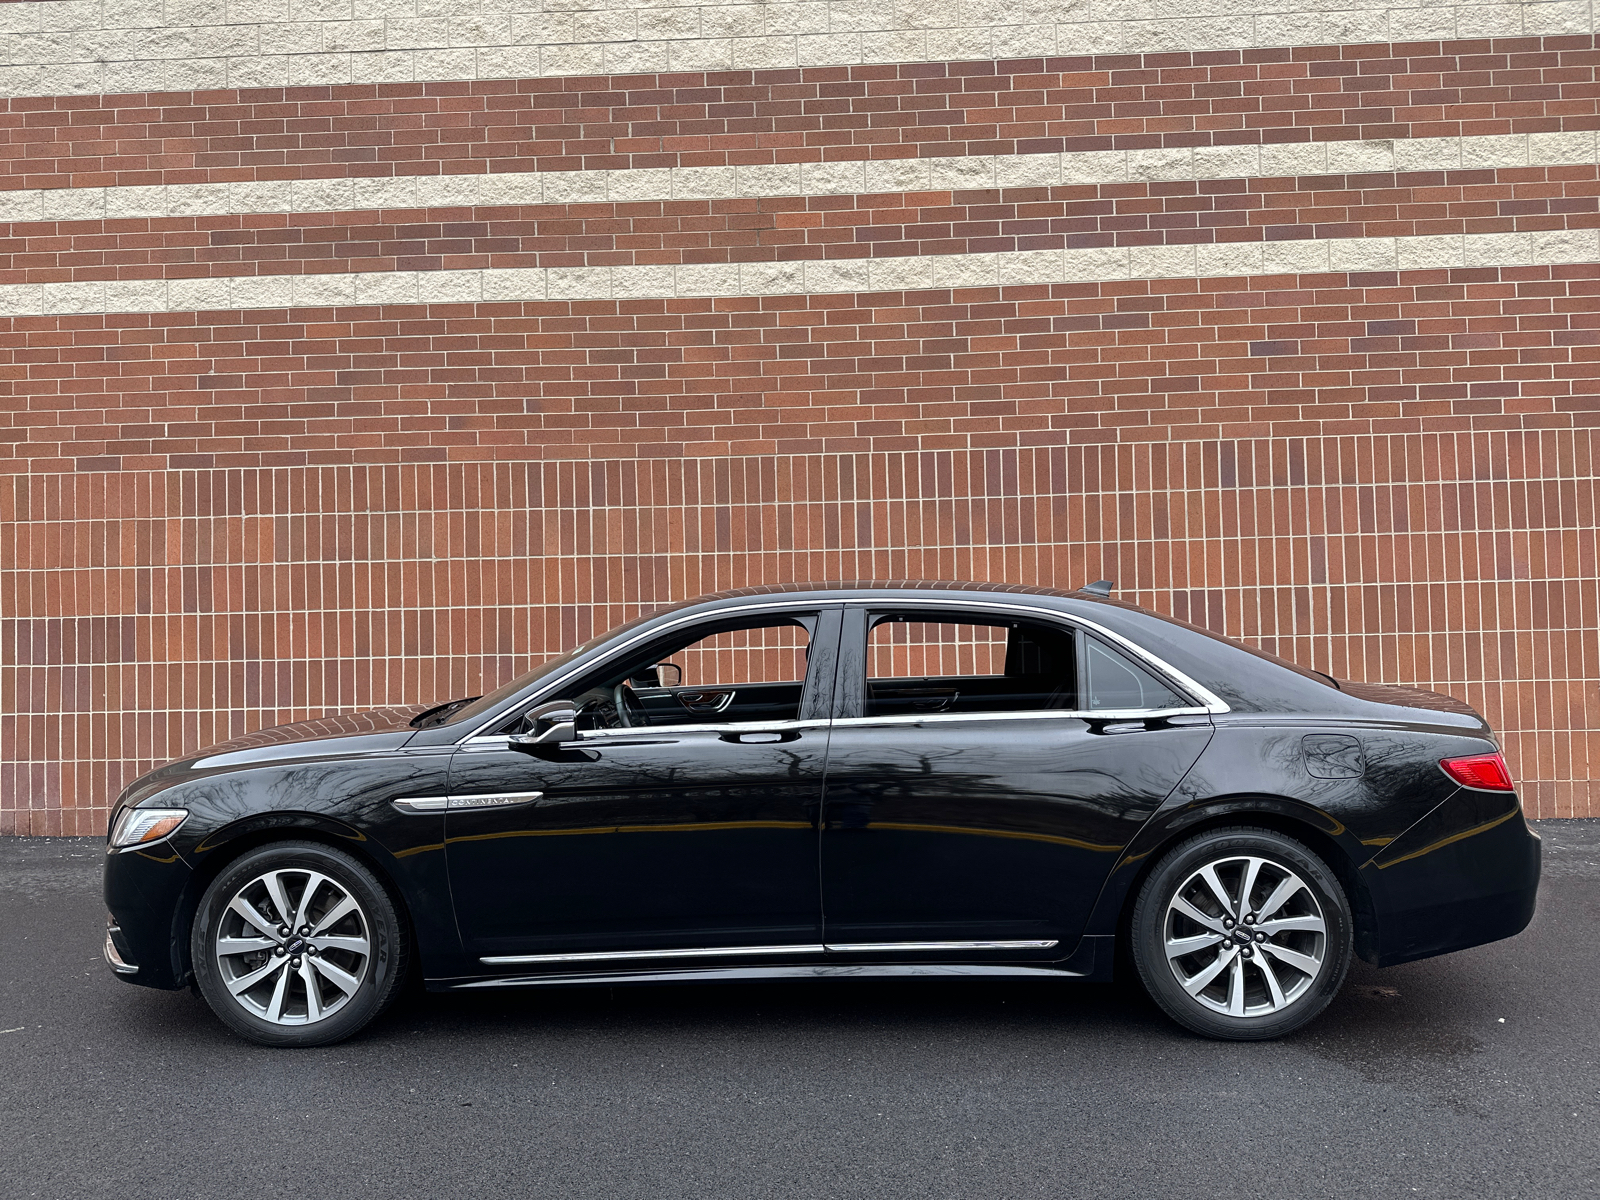 2019 Lincoln Continental Livery 5